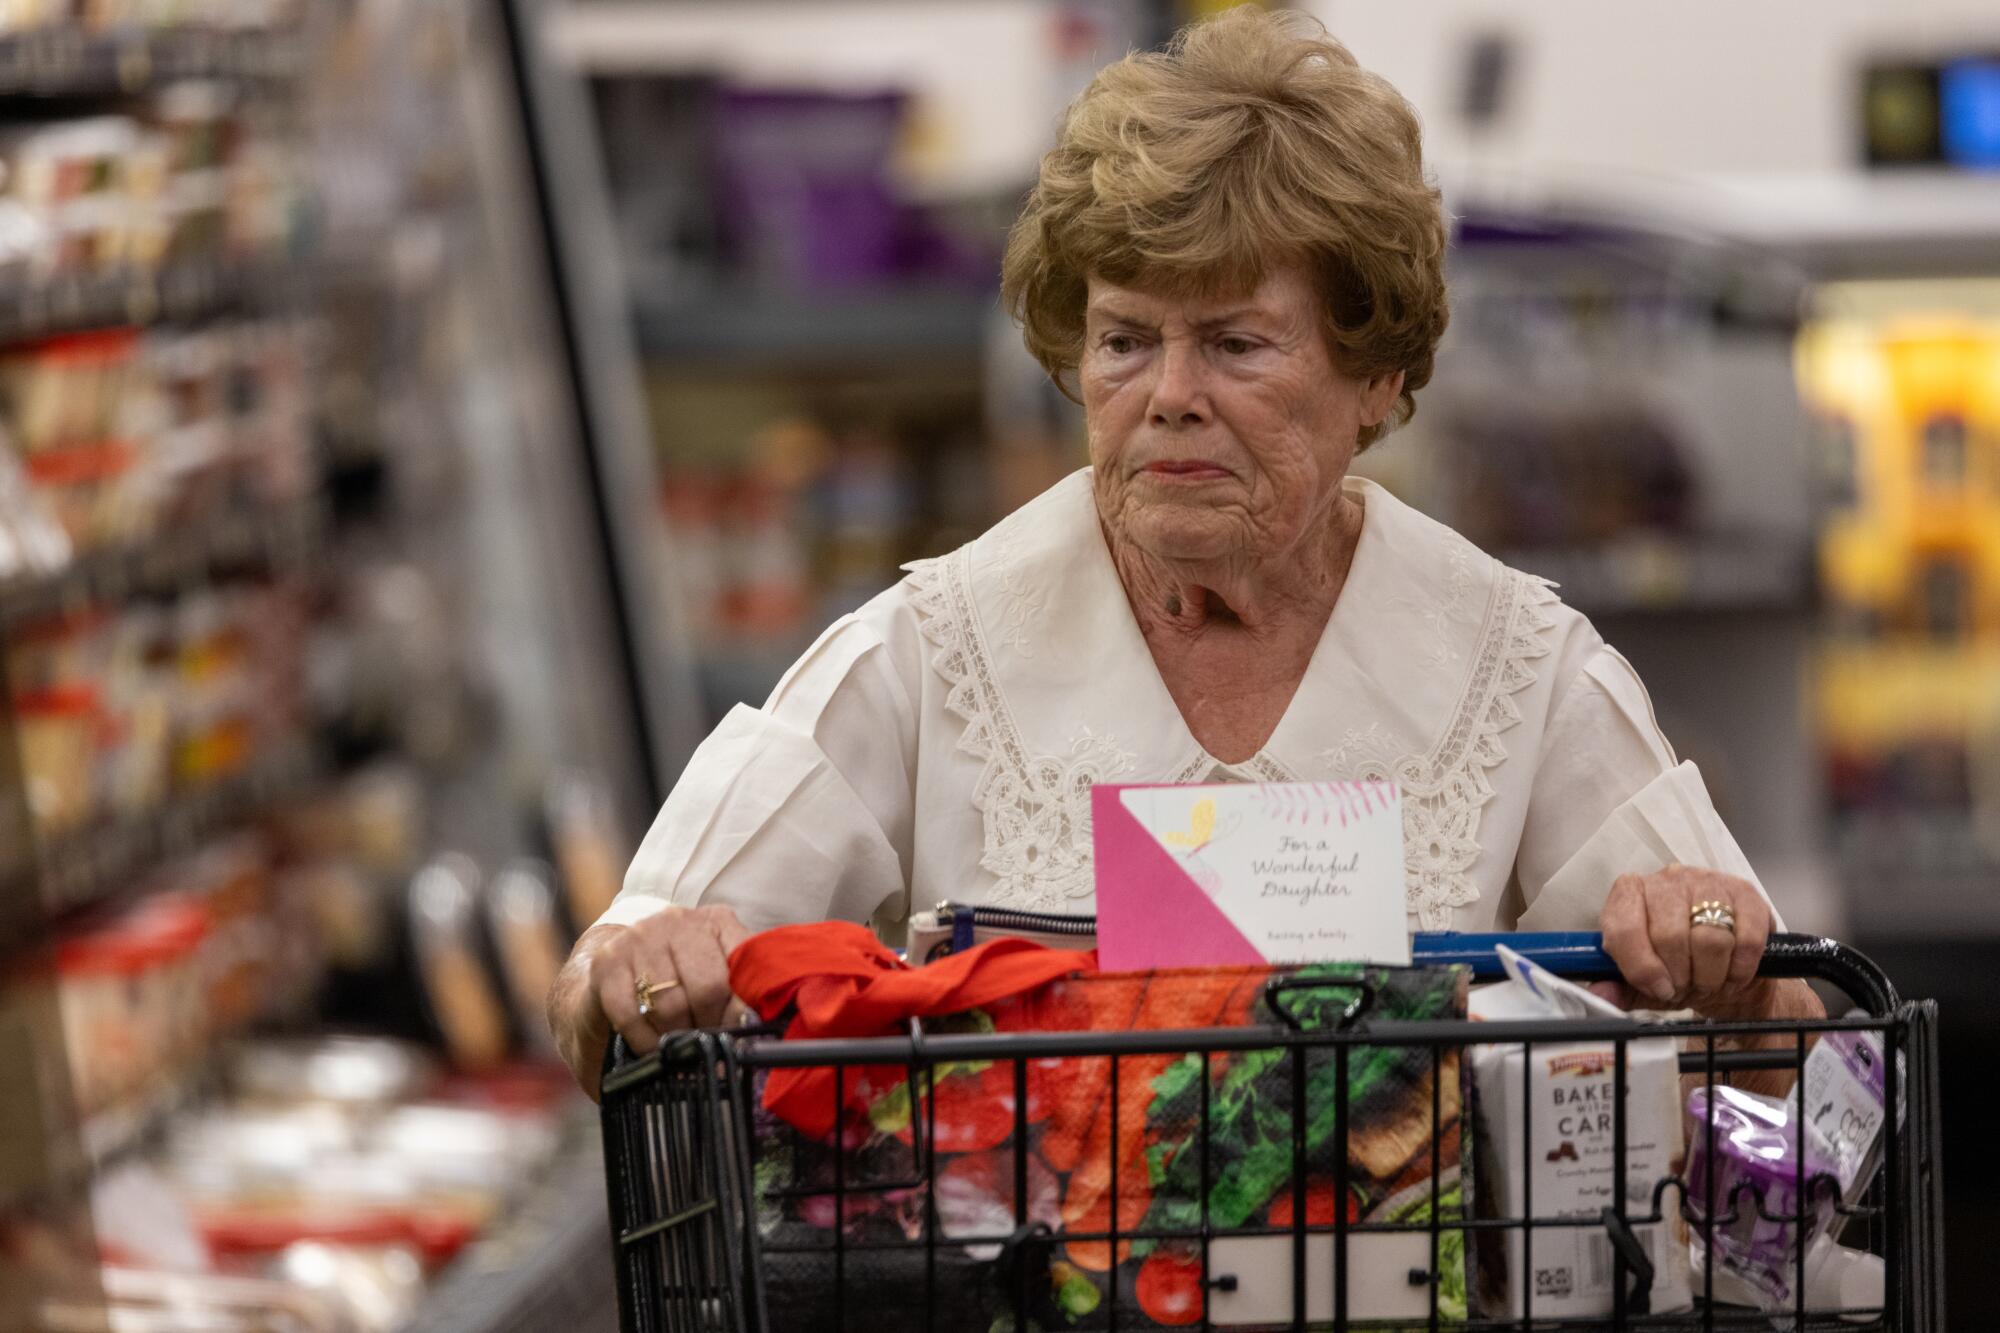 A woman pushes a shopping cart in a grocery store.